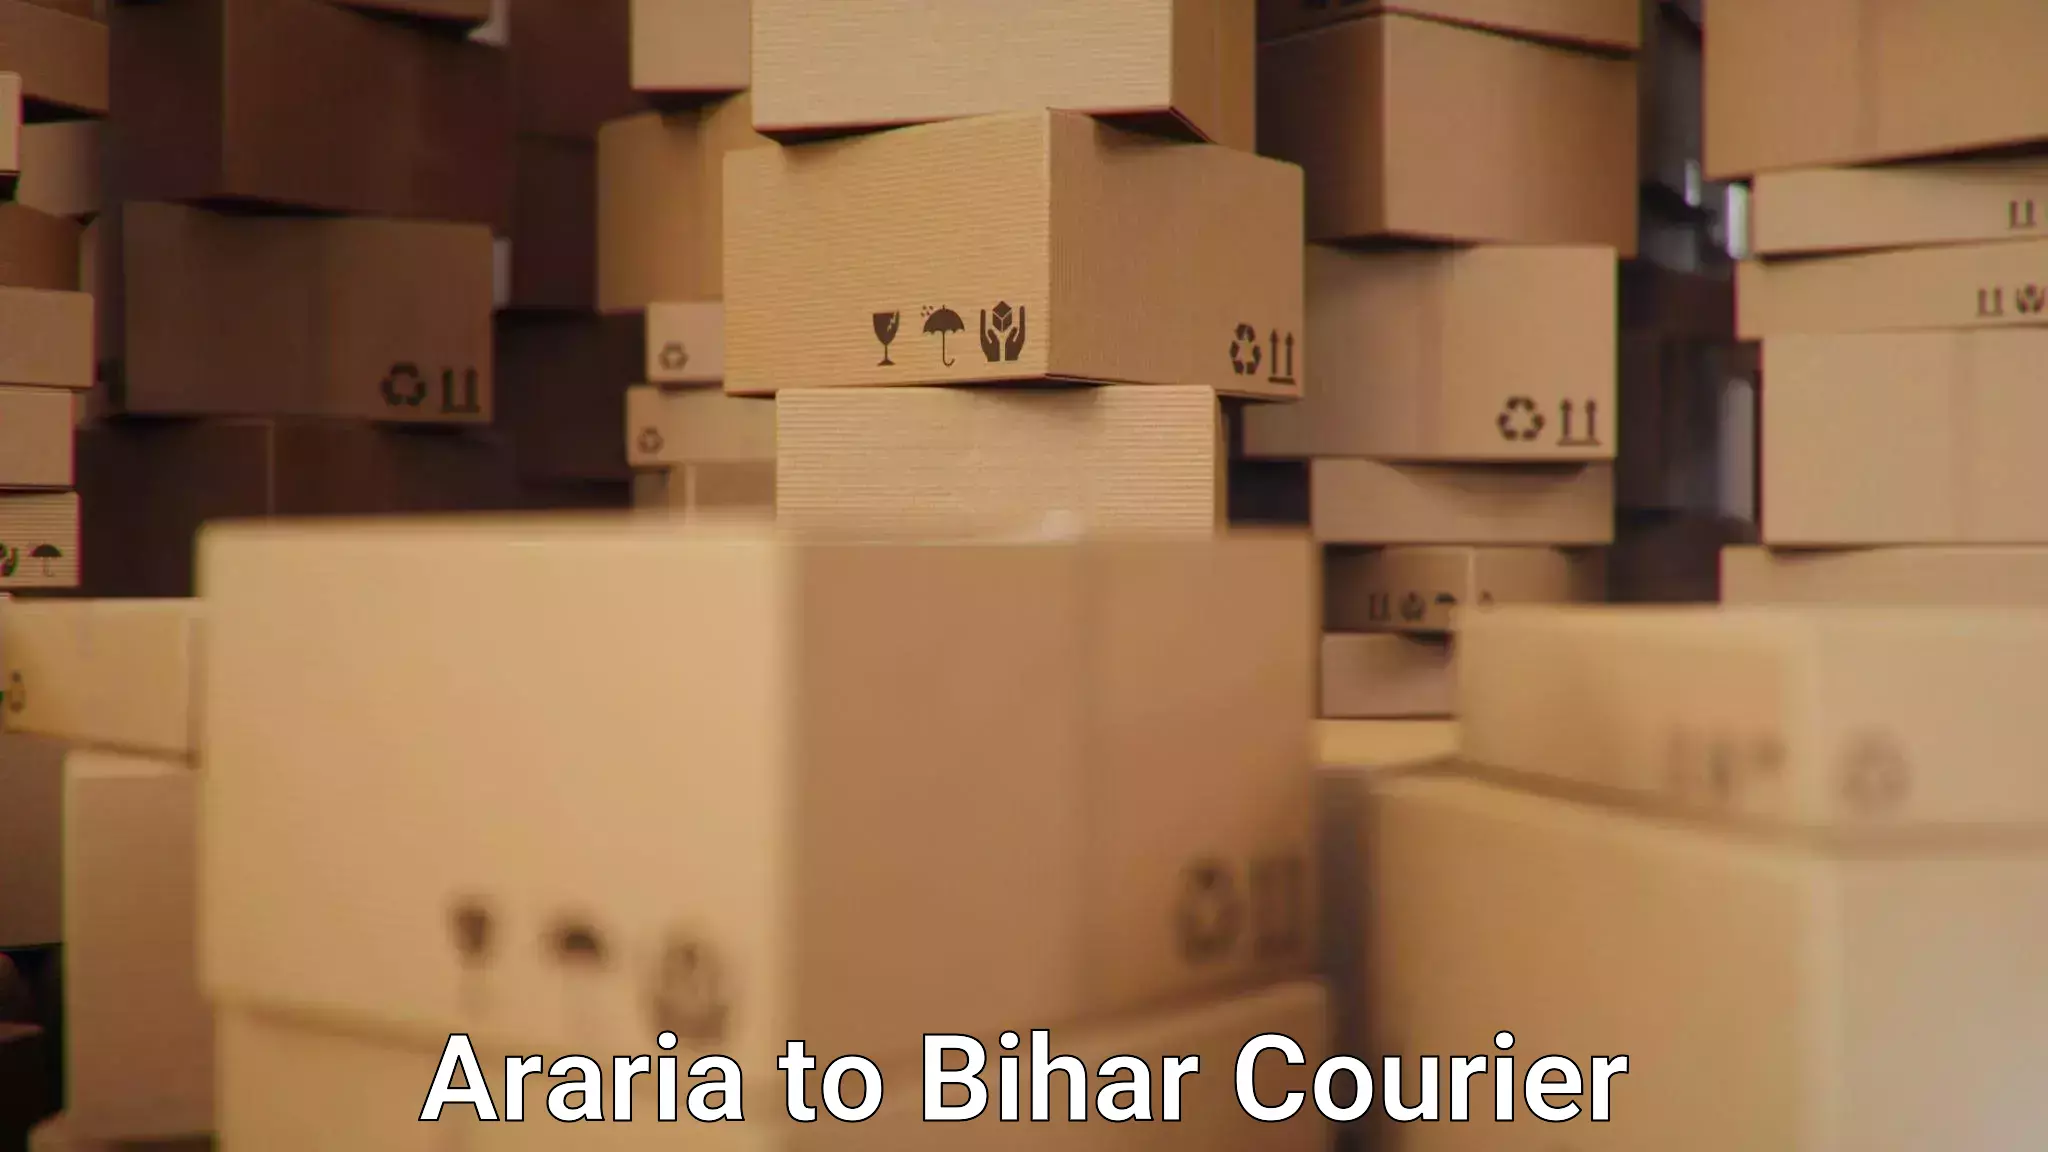 Global courier networks Araria to Bihar